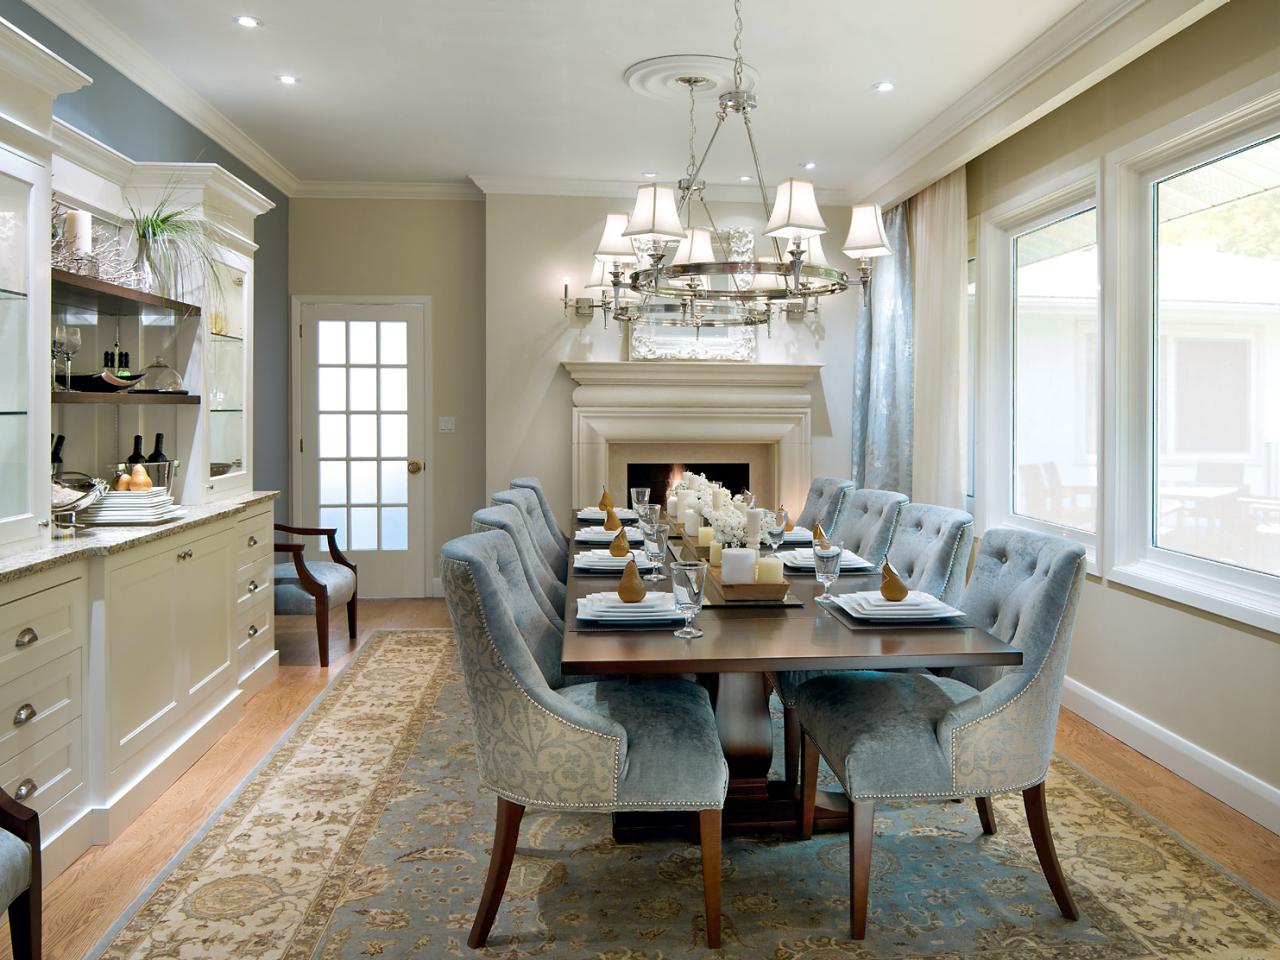 Space Into A Divine Dining Room, Turn Living Room Into Dining Room